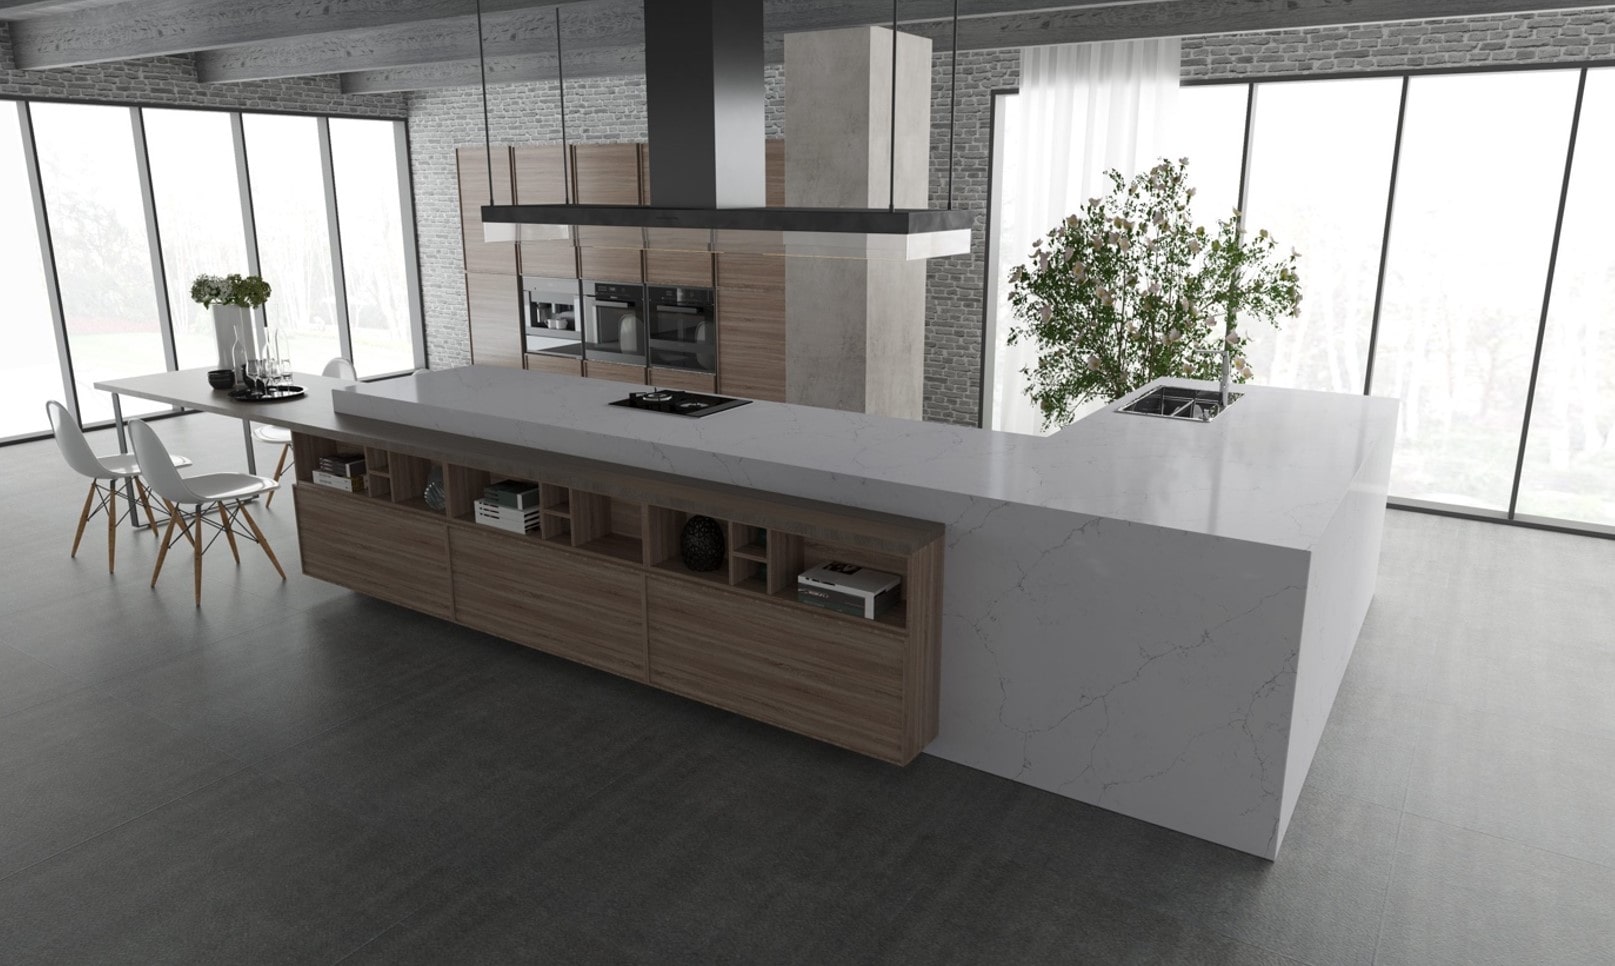 Modern kitchen with full height windows in background